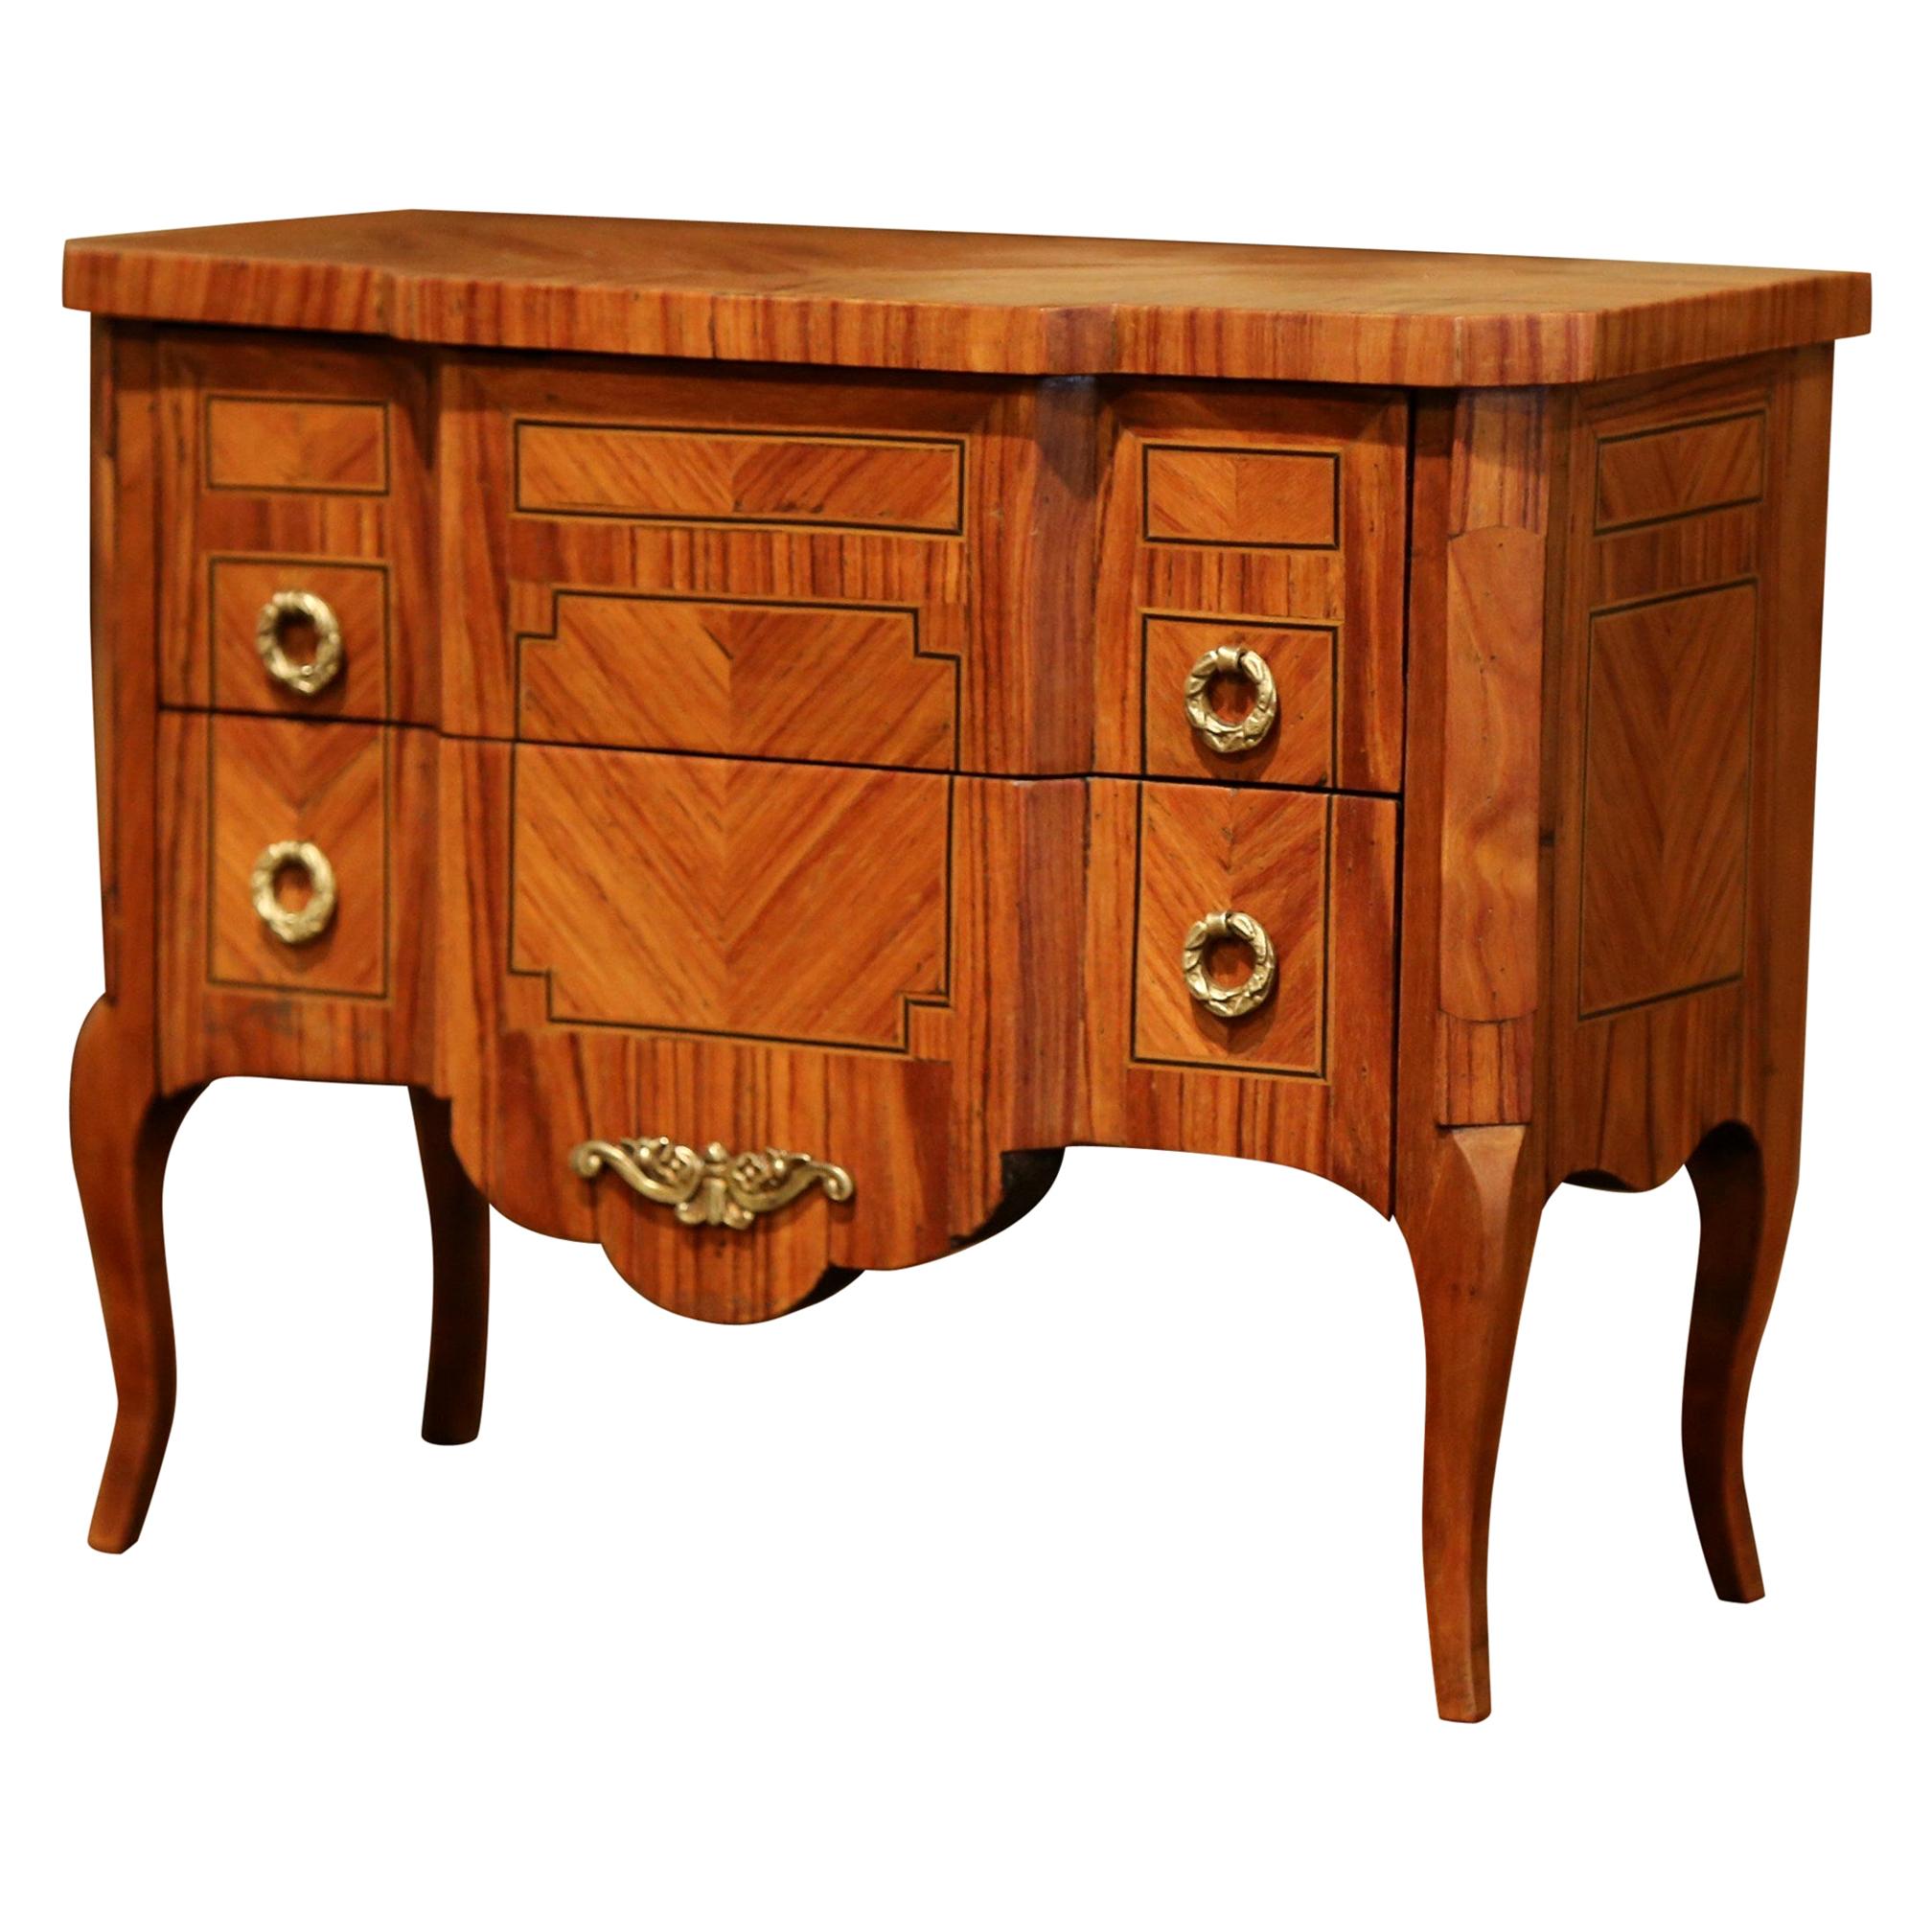 Mid-20th Century French Louis XV Walnut Veneer Marquetry Inlay Miniature Commode